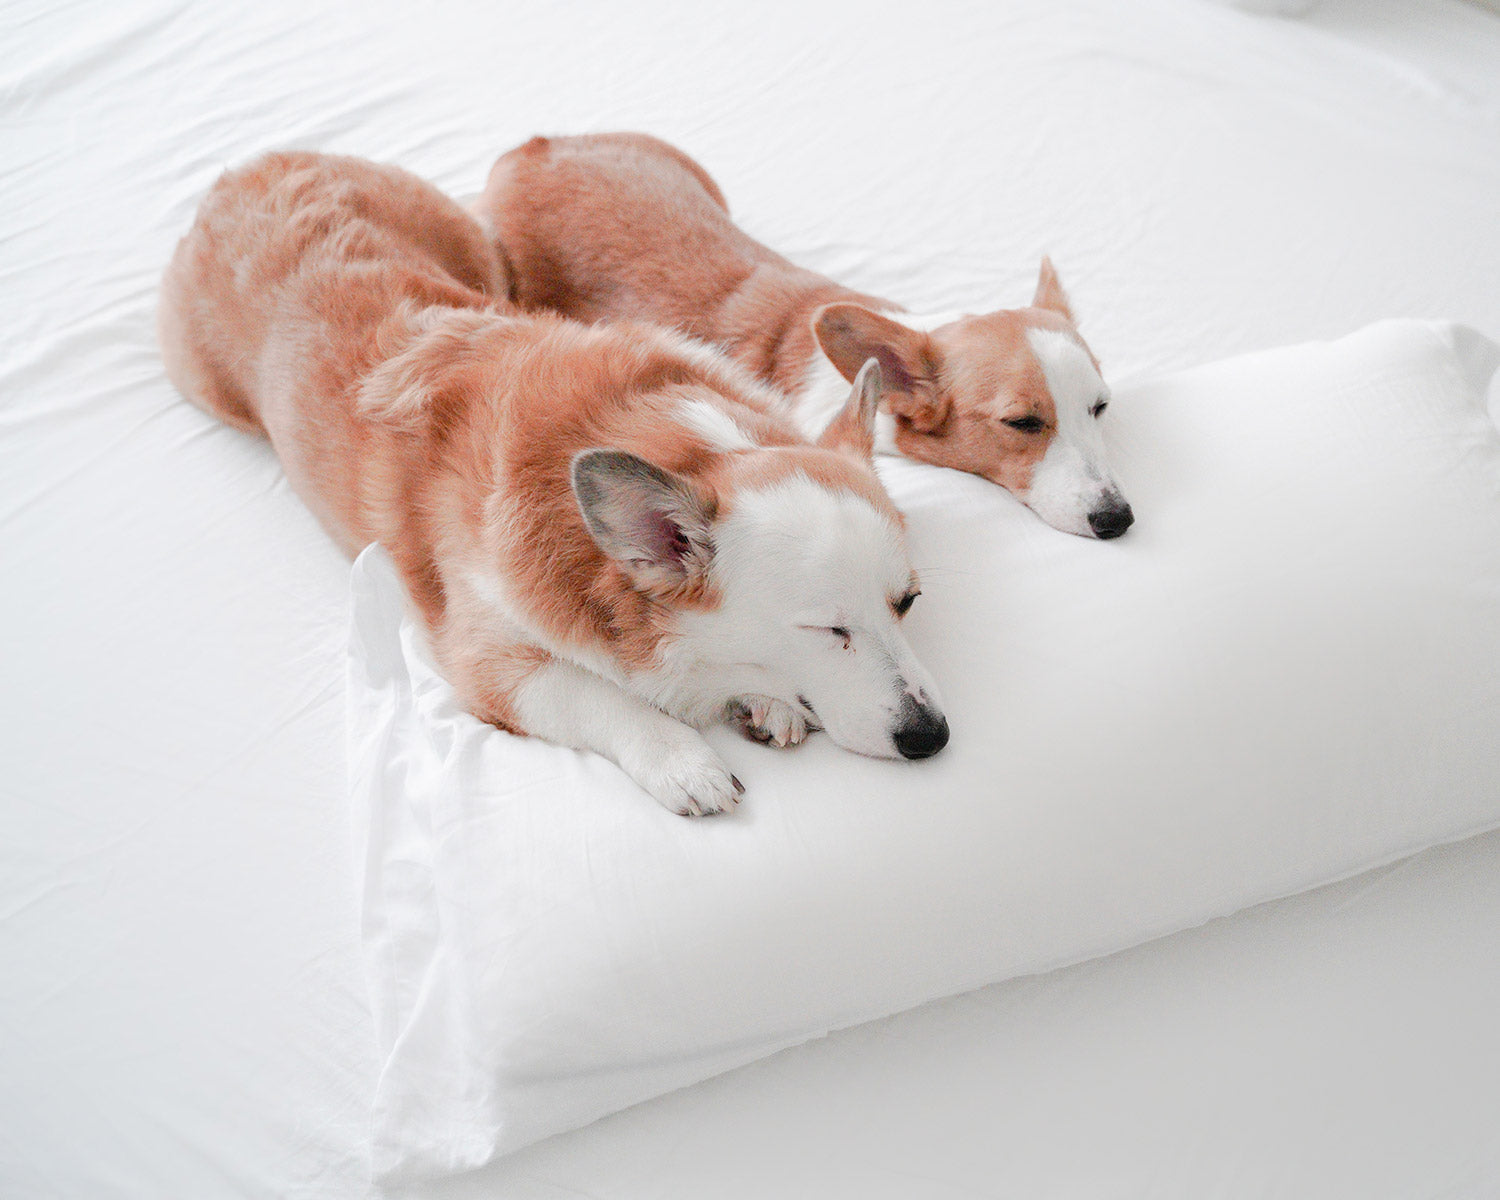 two corgi dogs sleeping on white Peacock Alley sheets